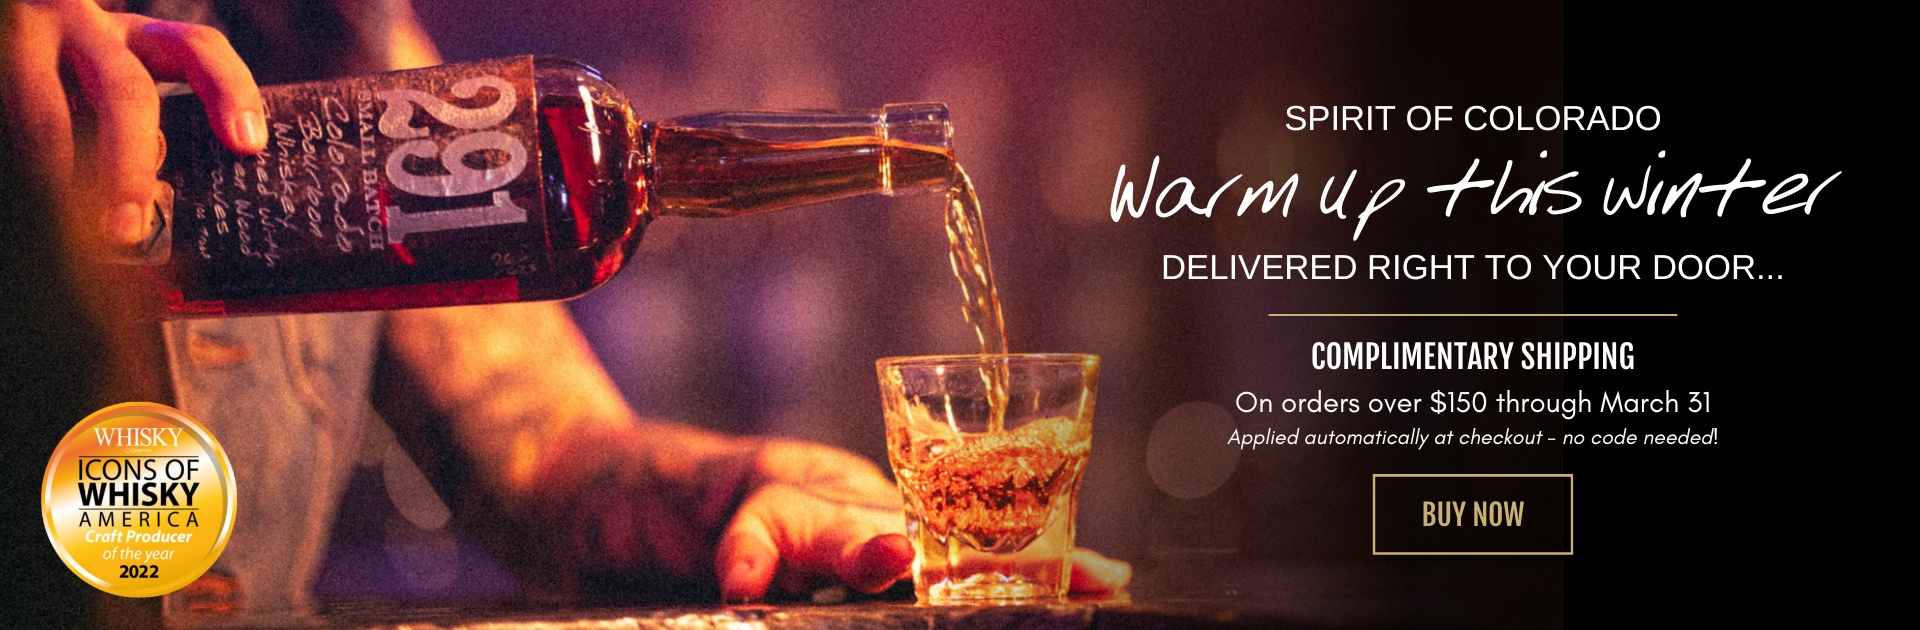 Warm up this winter with the Spirit of Colorado delivered right to your door. Complimentary shipping on orders over $150. Discount applied automatically at checkout. No code needed!